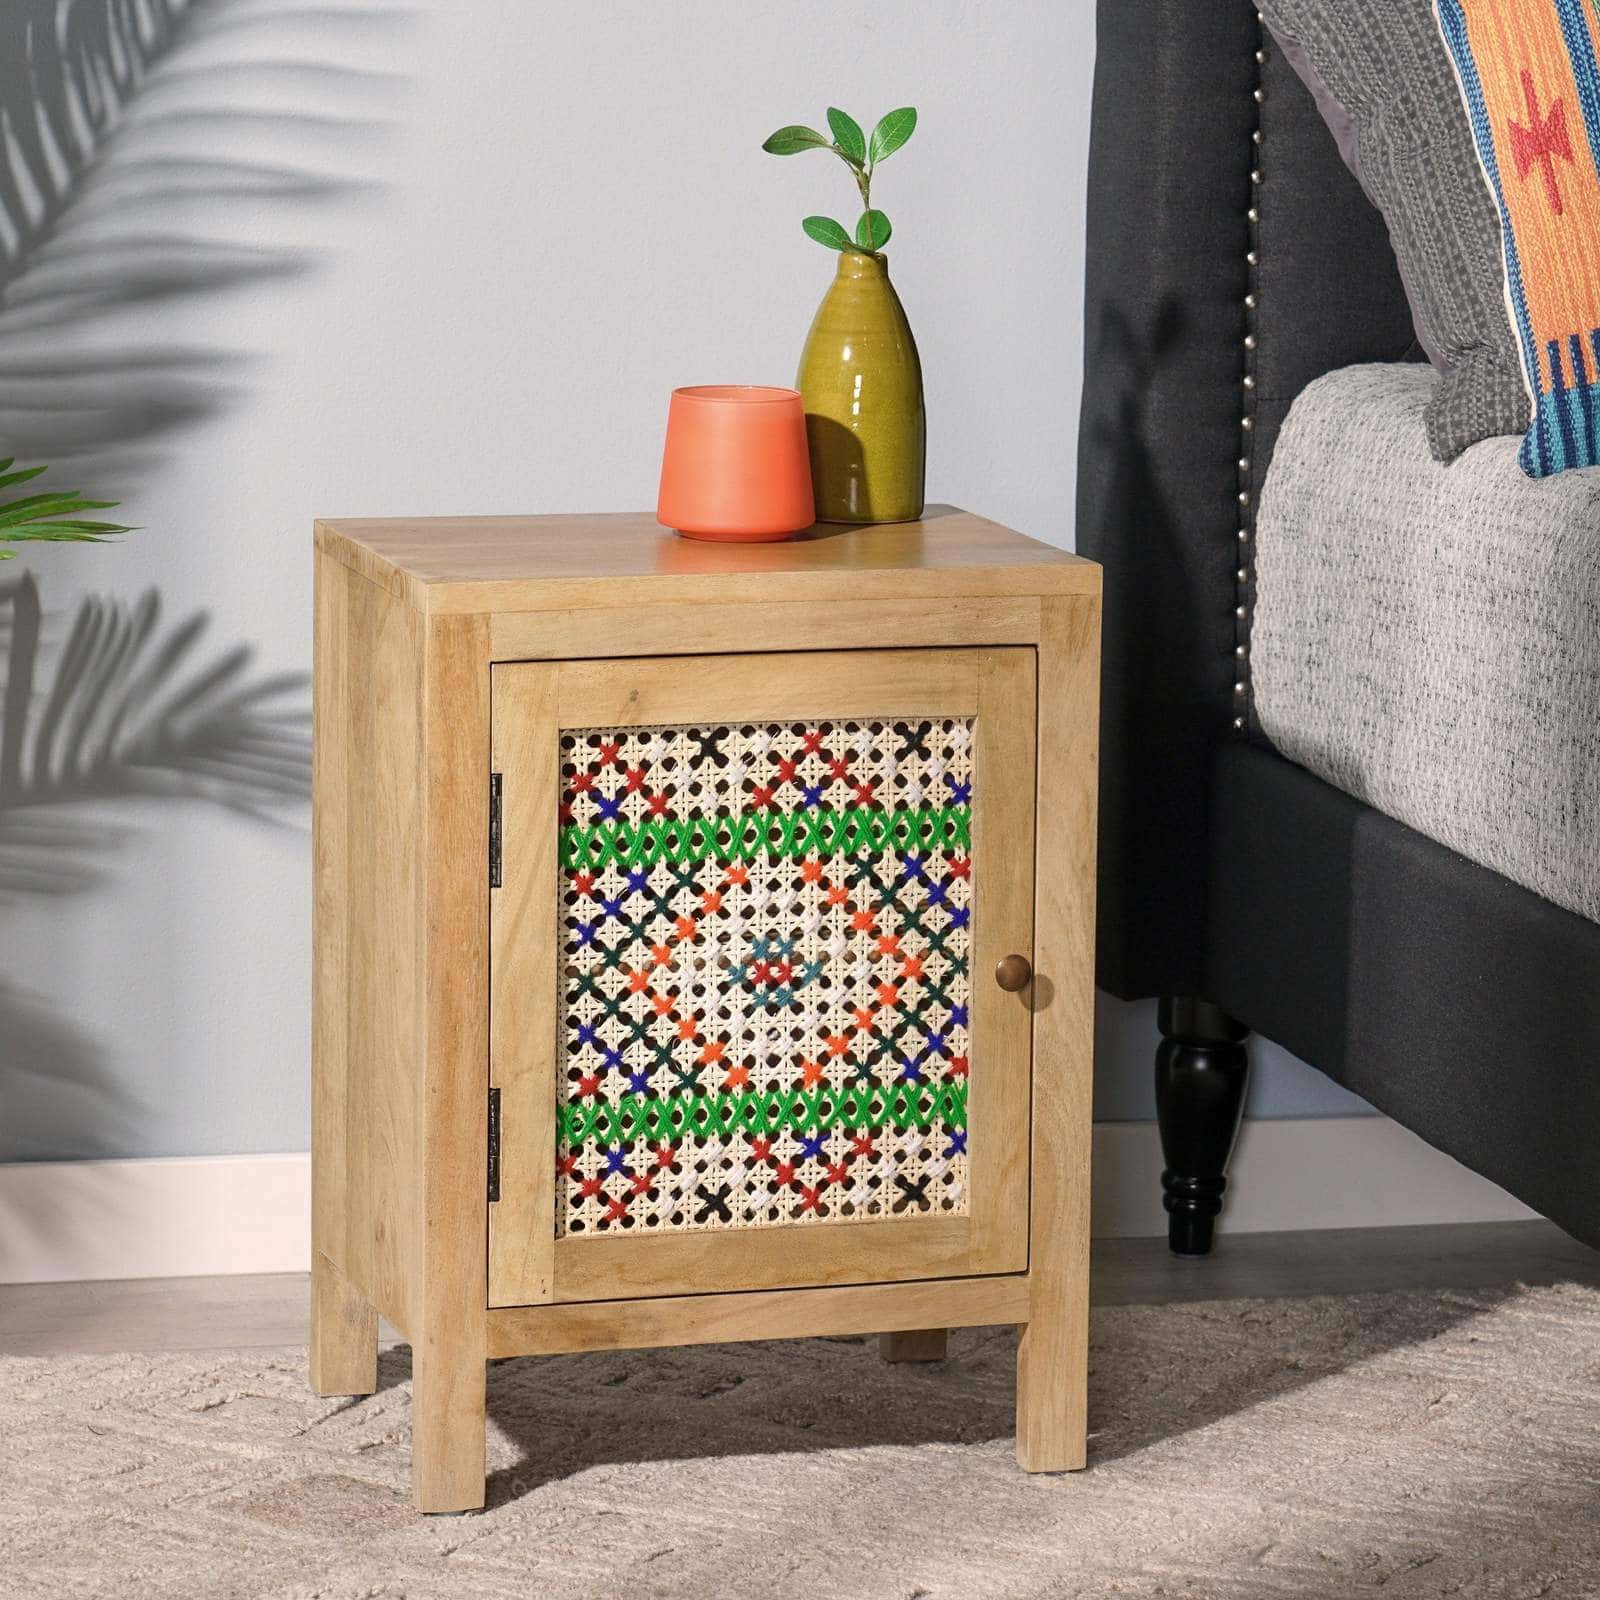 Bring Color to Your Room with this Bohemian Nightstand